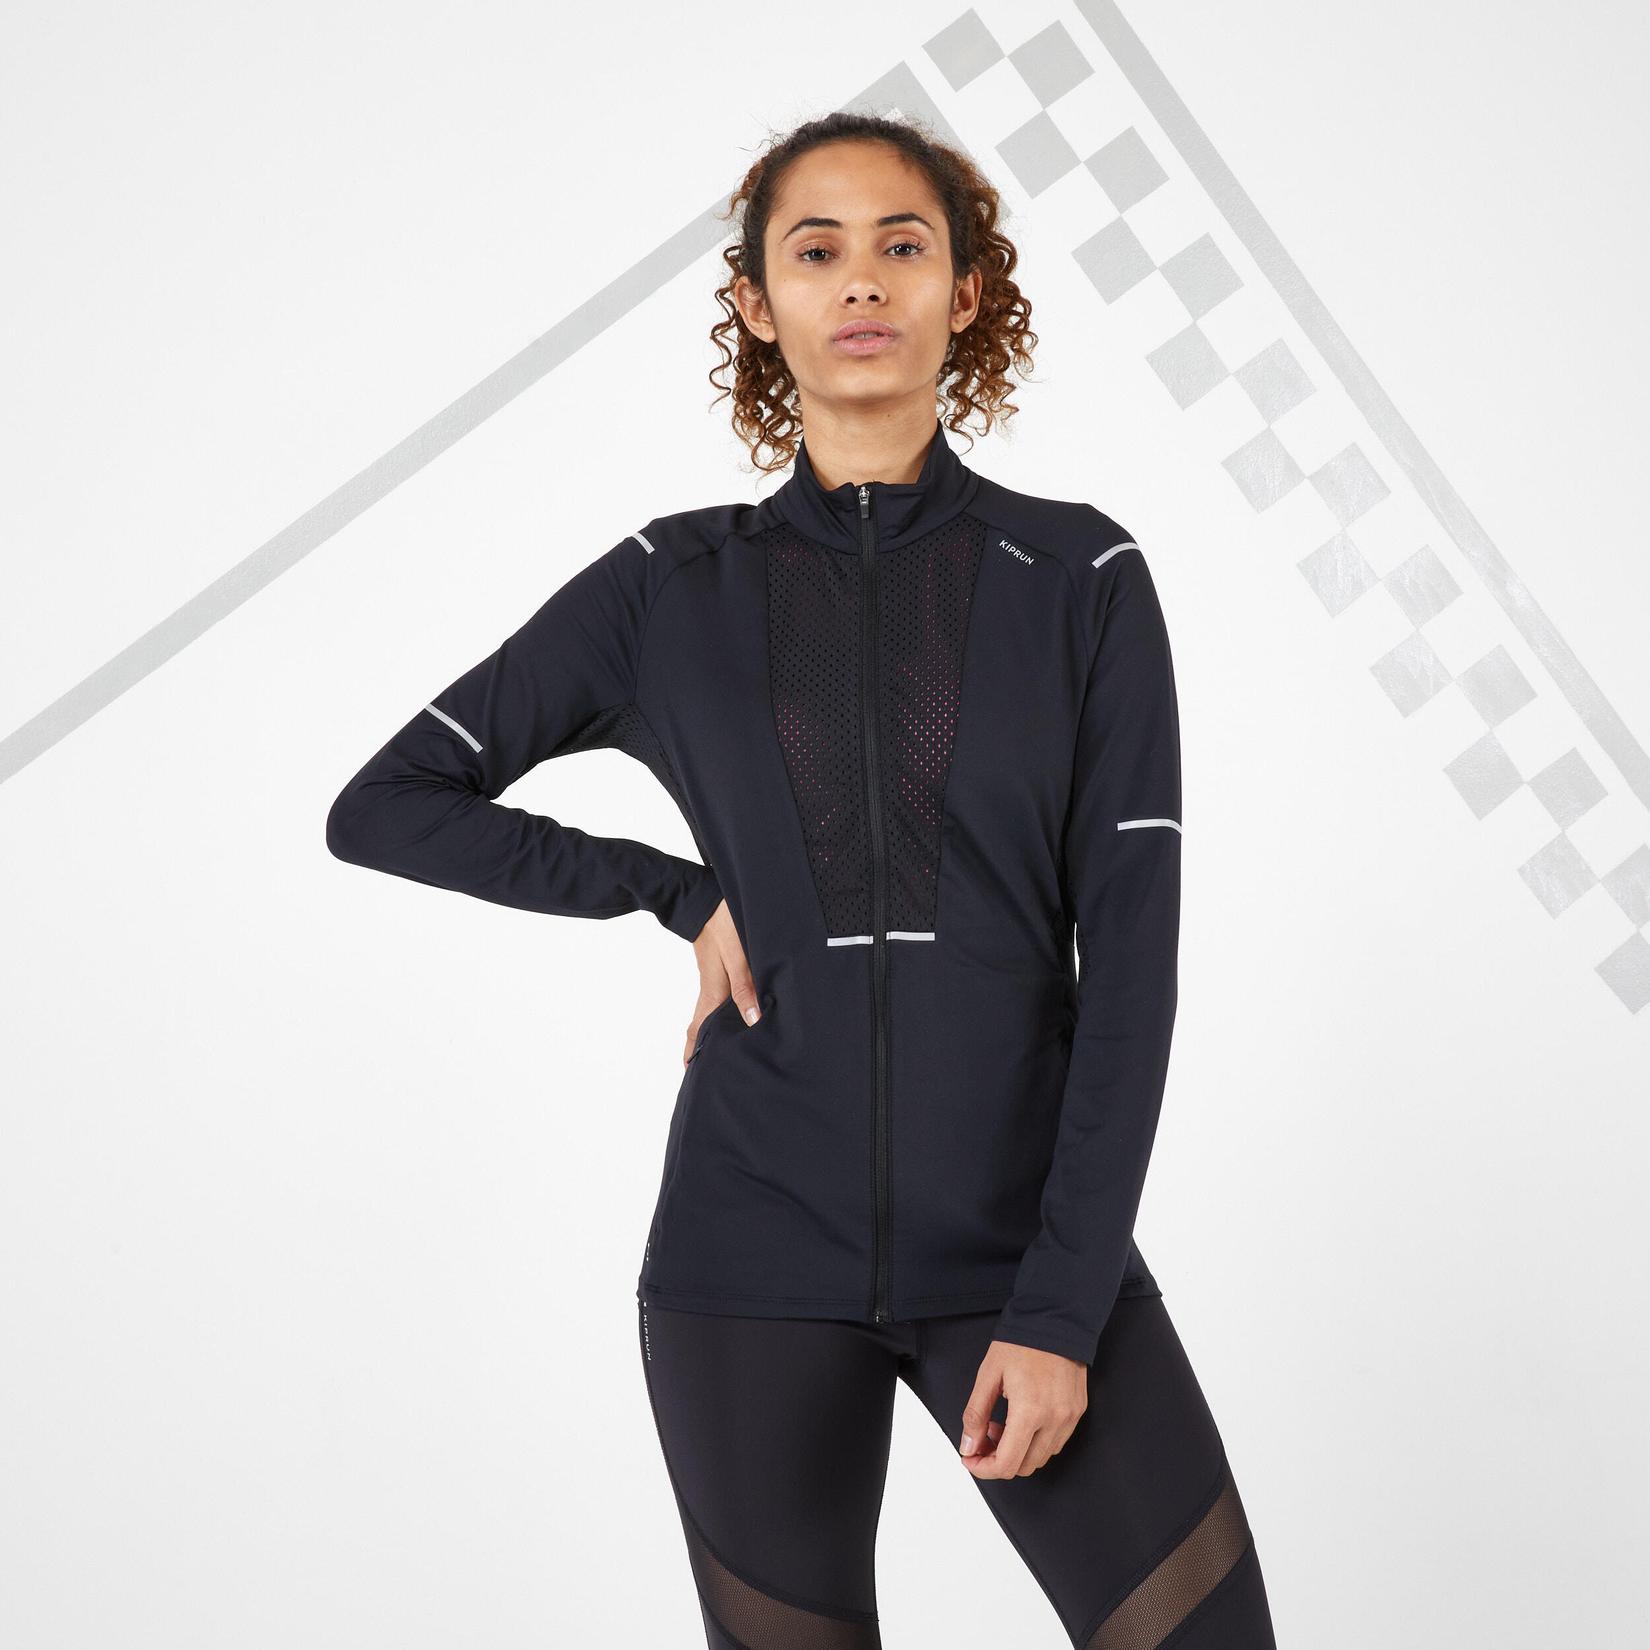 Women's Running Breathable Jacket - black offers at R 499 in Decathlon